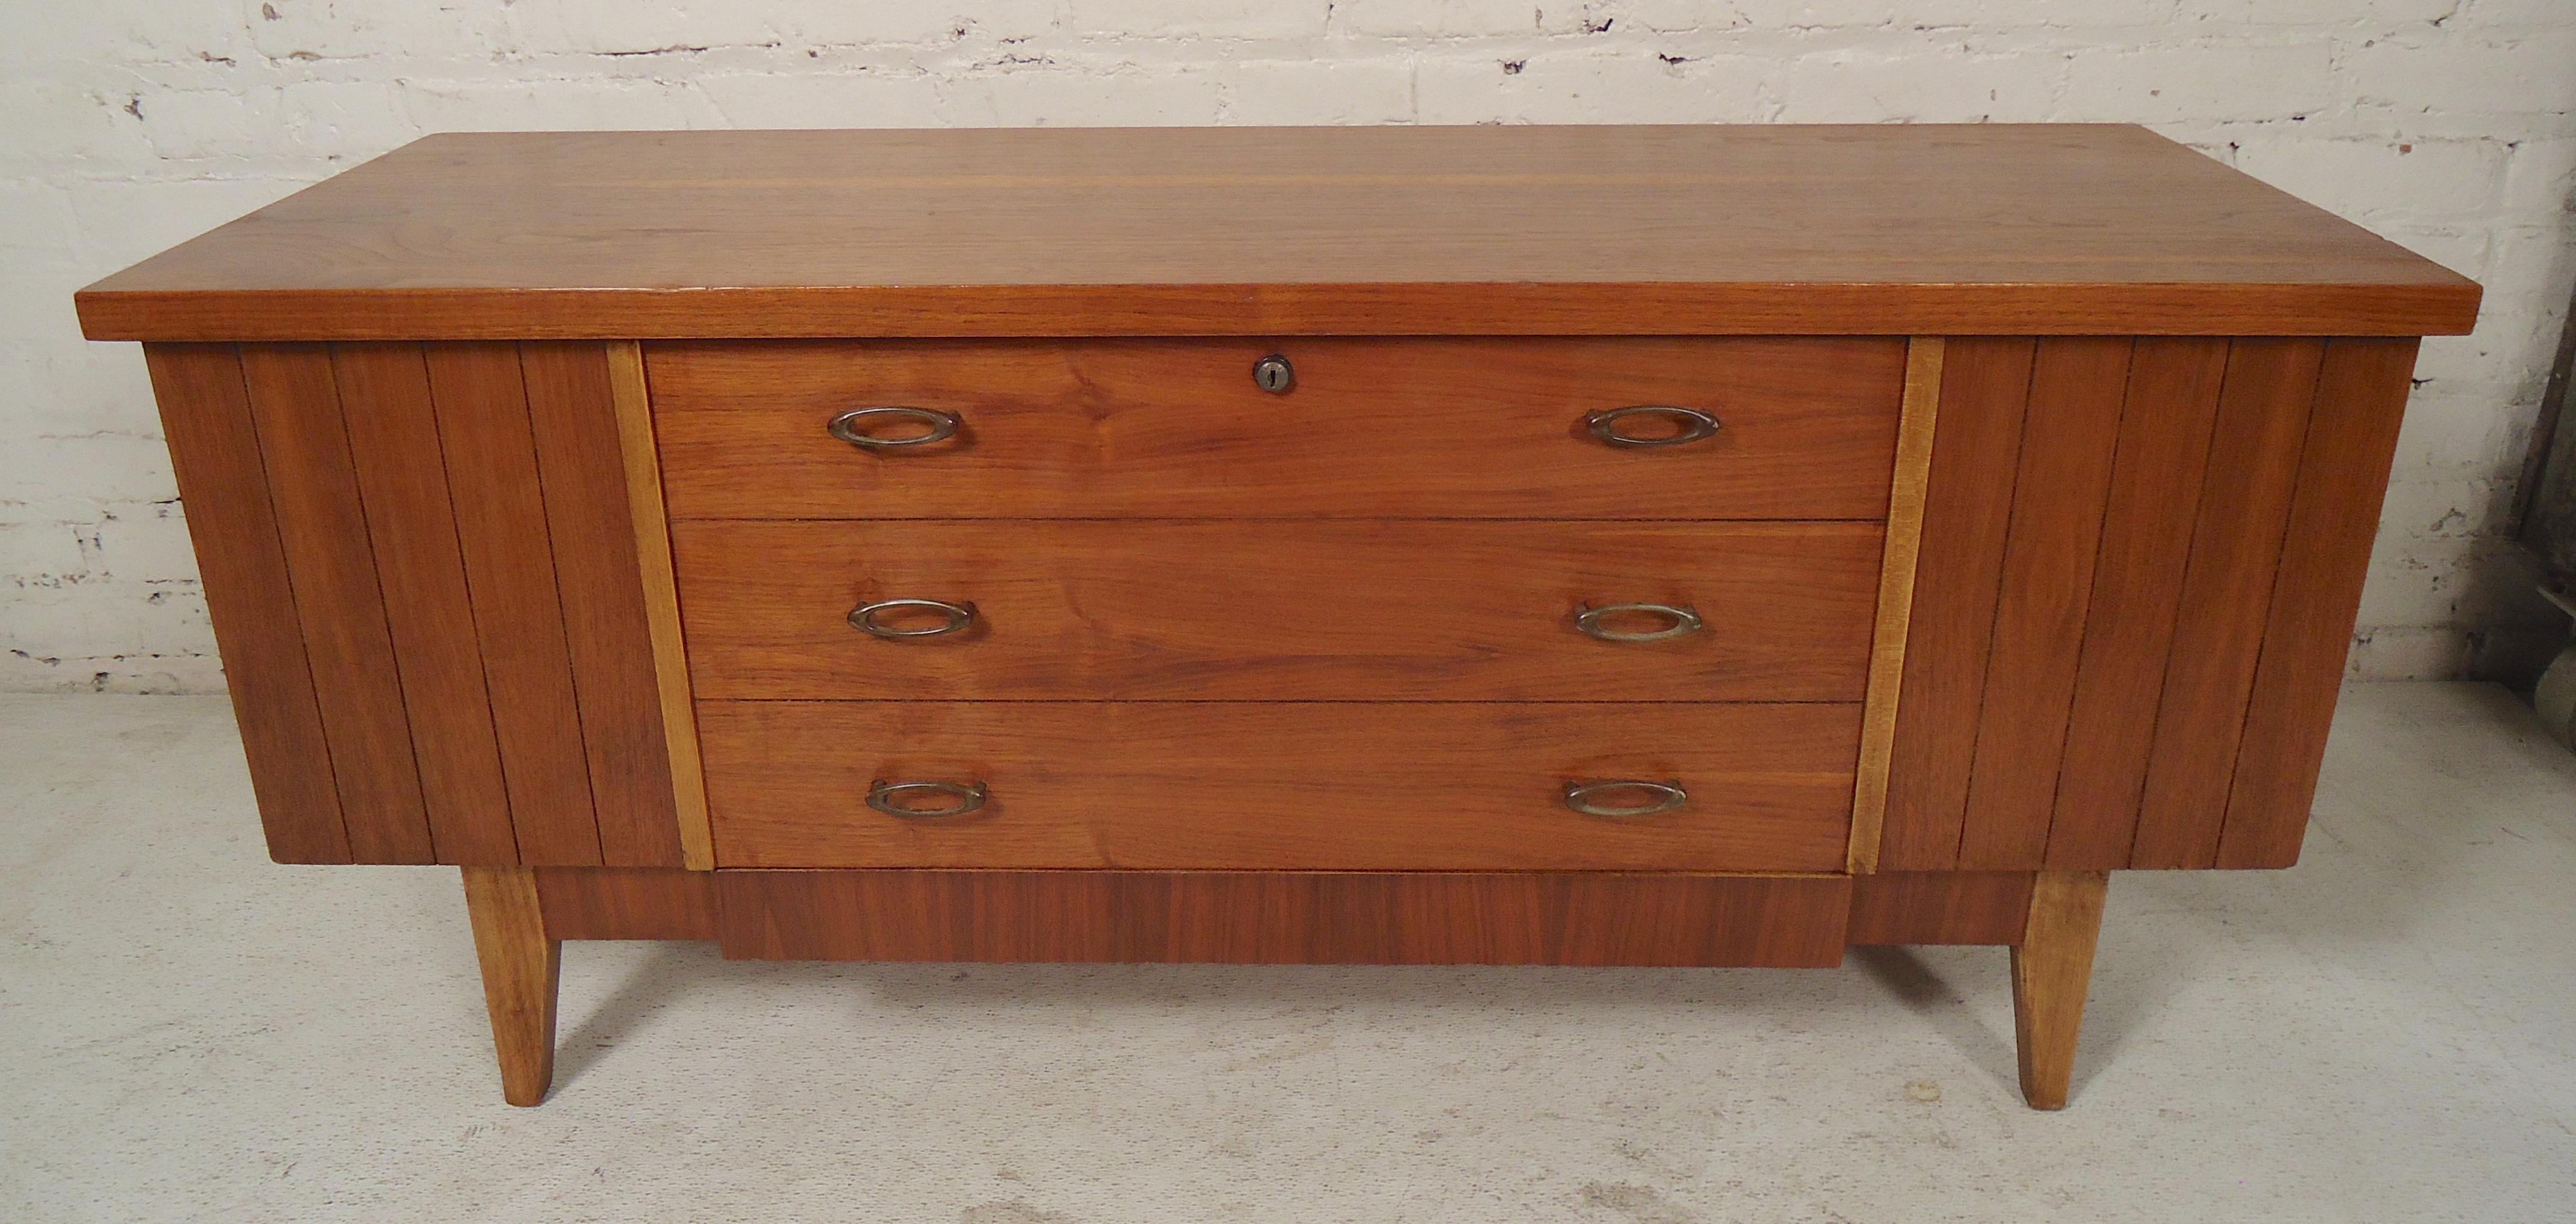 Vintage modern trunk by Lane furniture with faux front drawers and tapered legs.
(Please confirm item location - NY or NJ - with dealer).
 